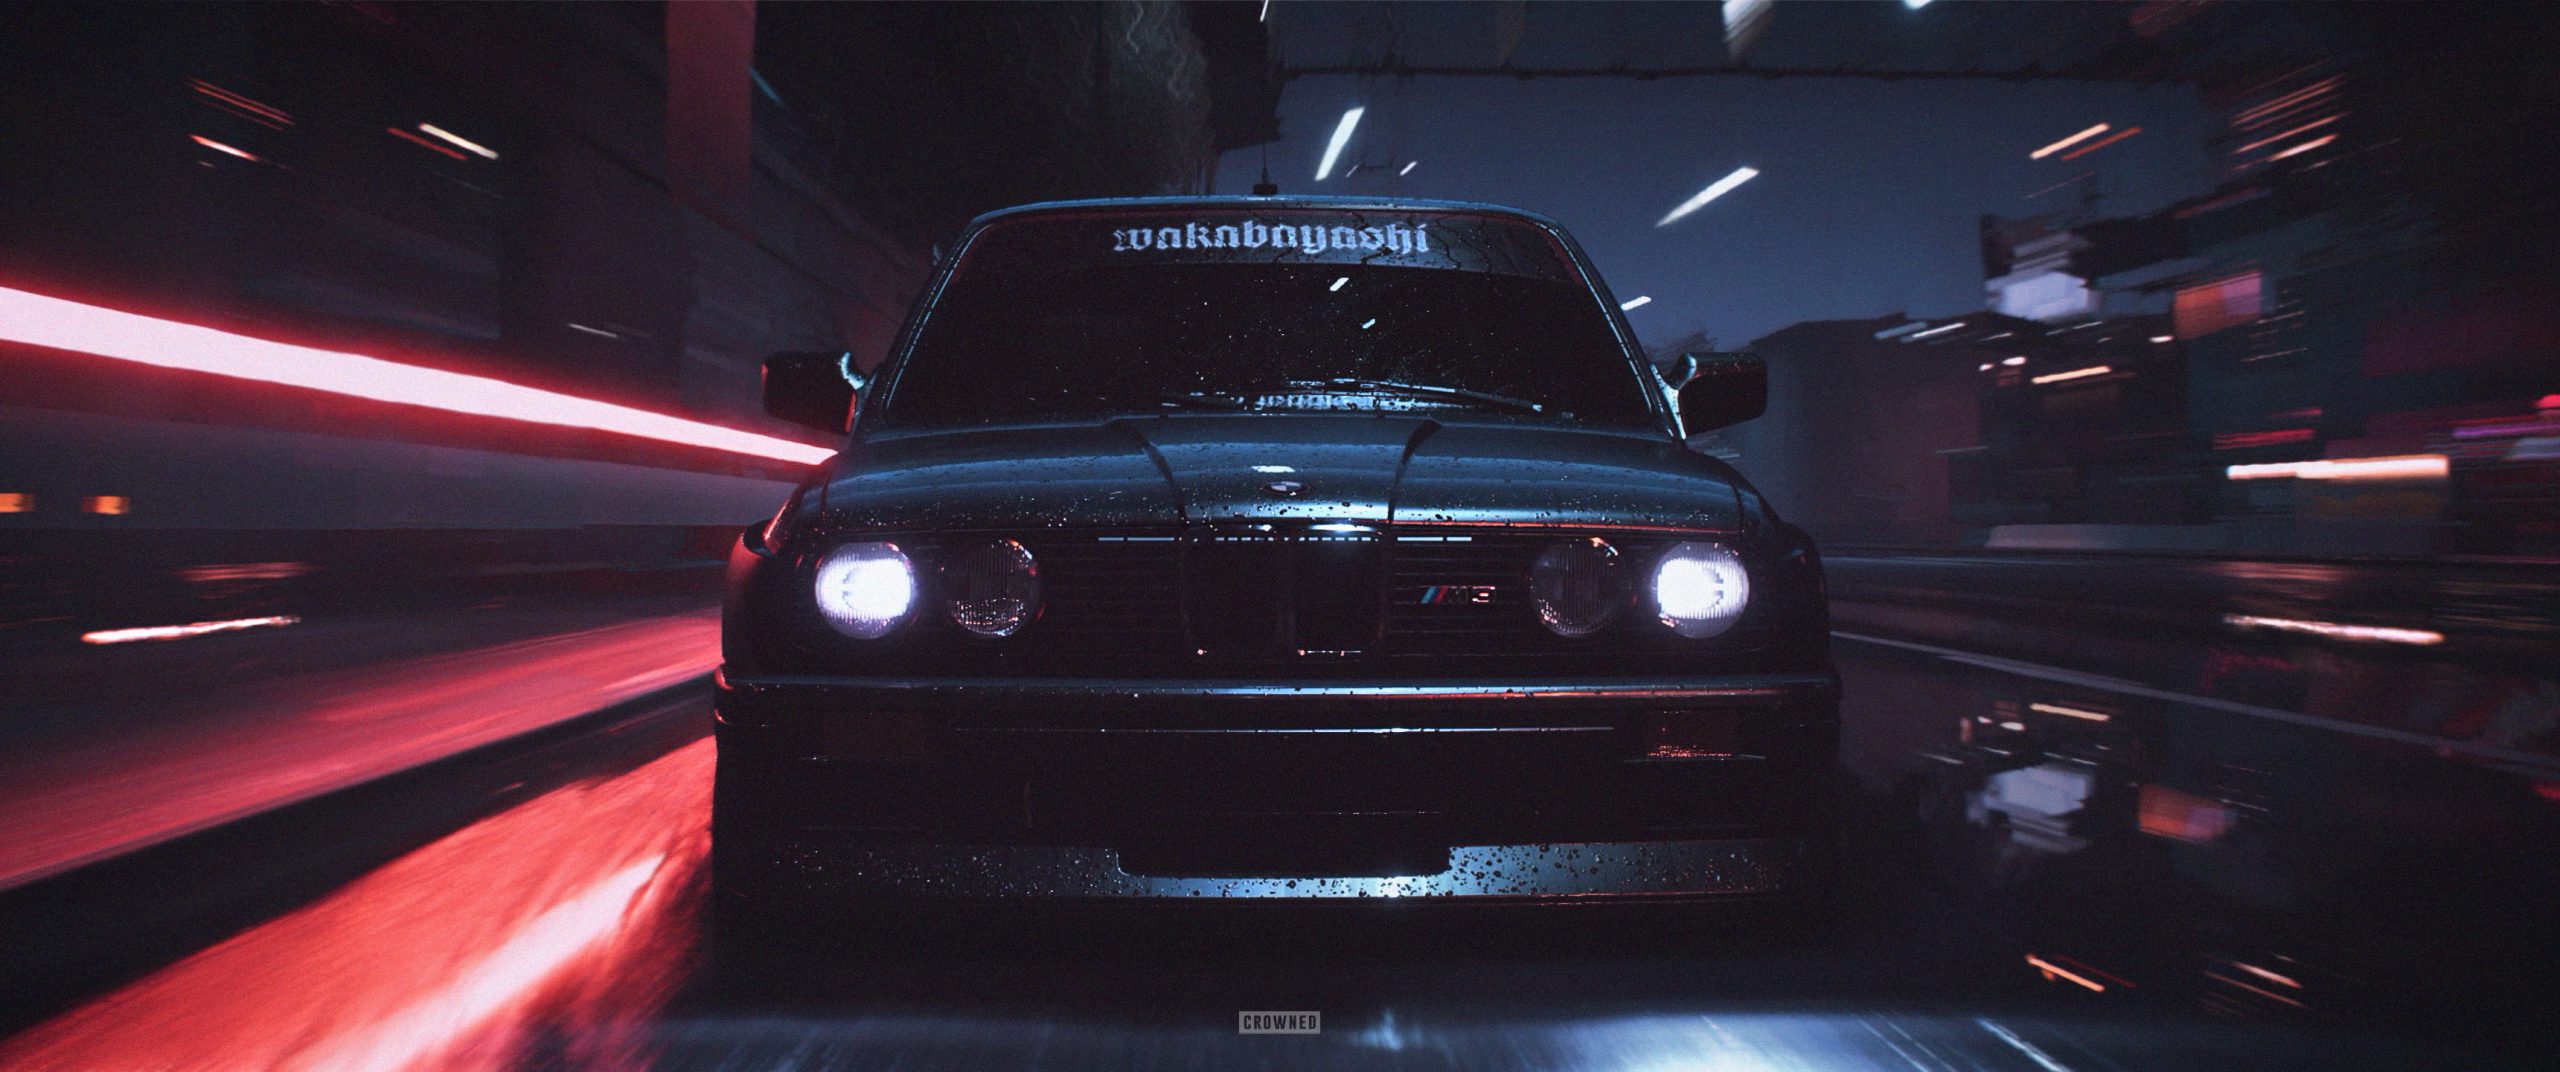 black car time-laps wallpaper, CROWNED, Need for Speed, BMW M3 wallpaper